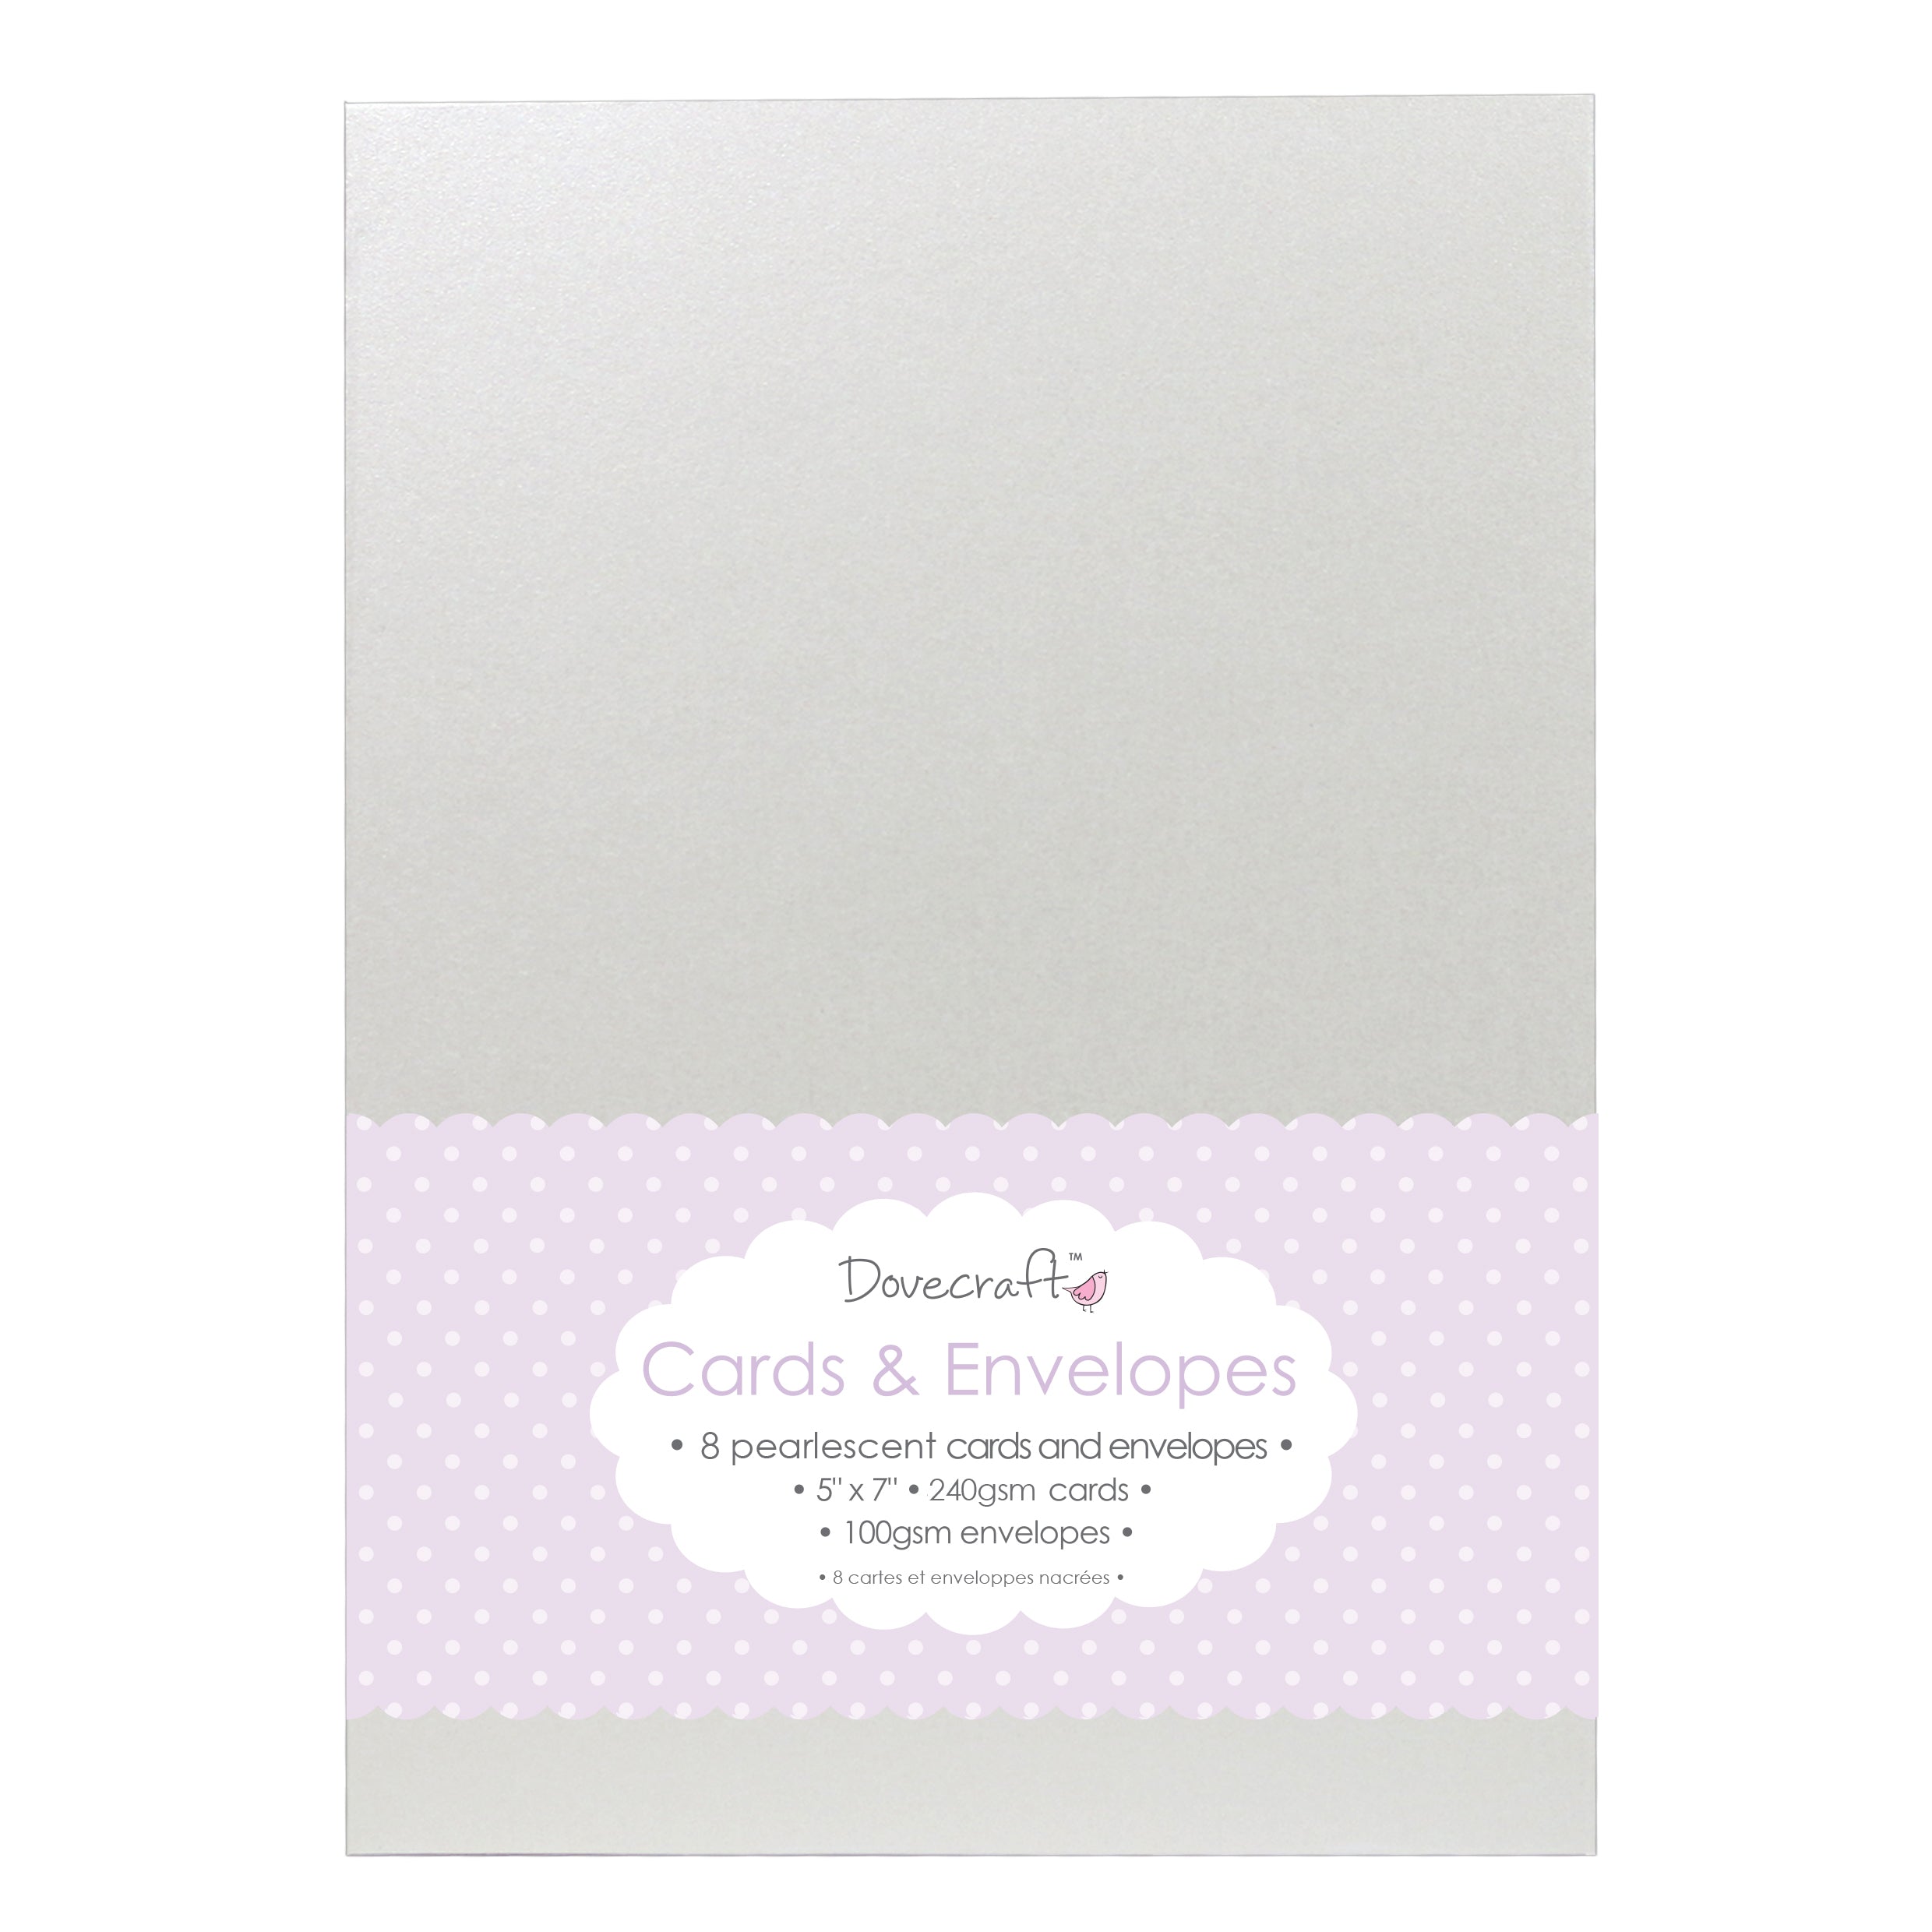 Dovecraft Cards & Envelopes - Pearlescent